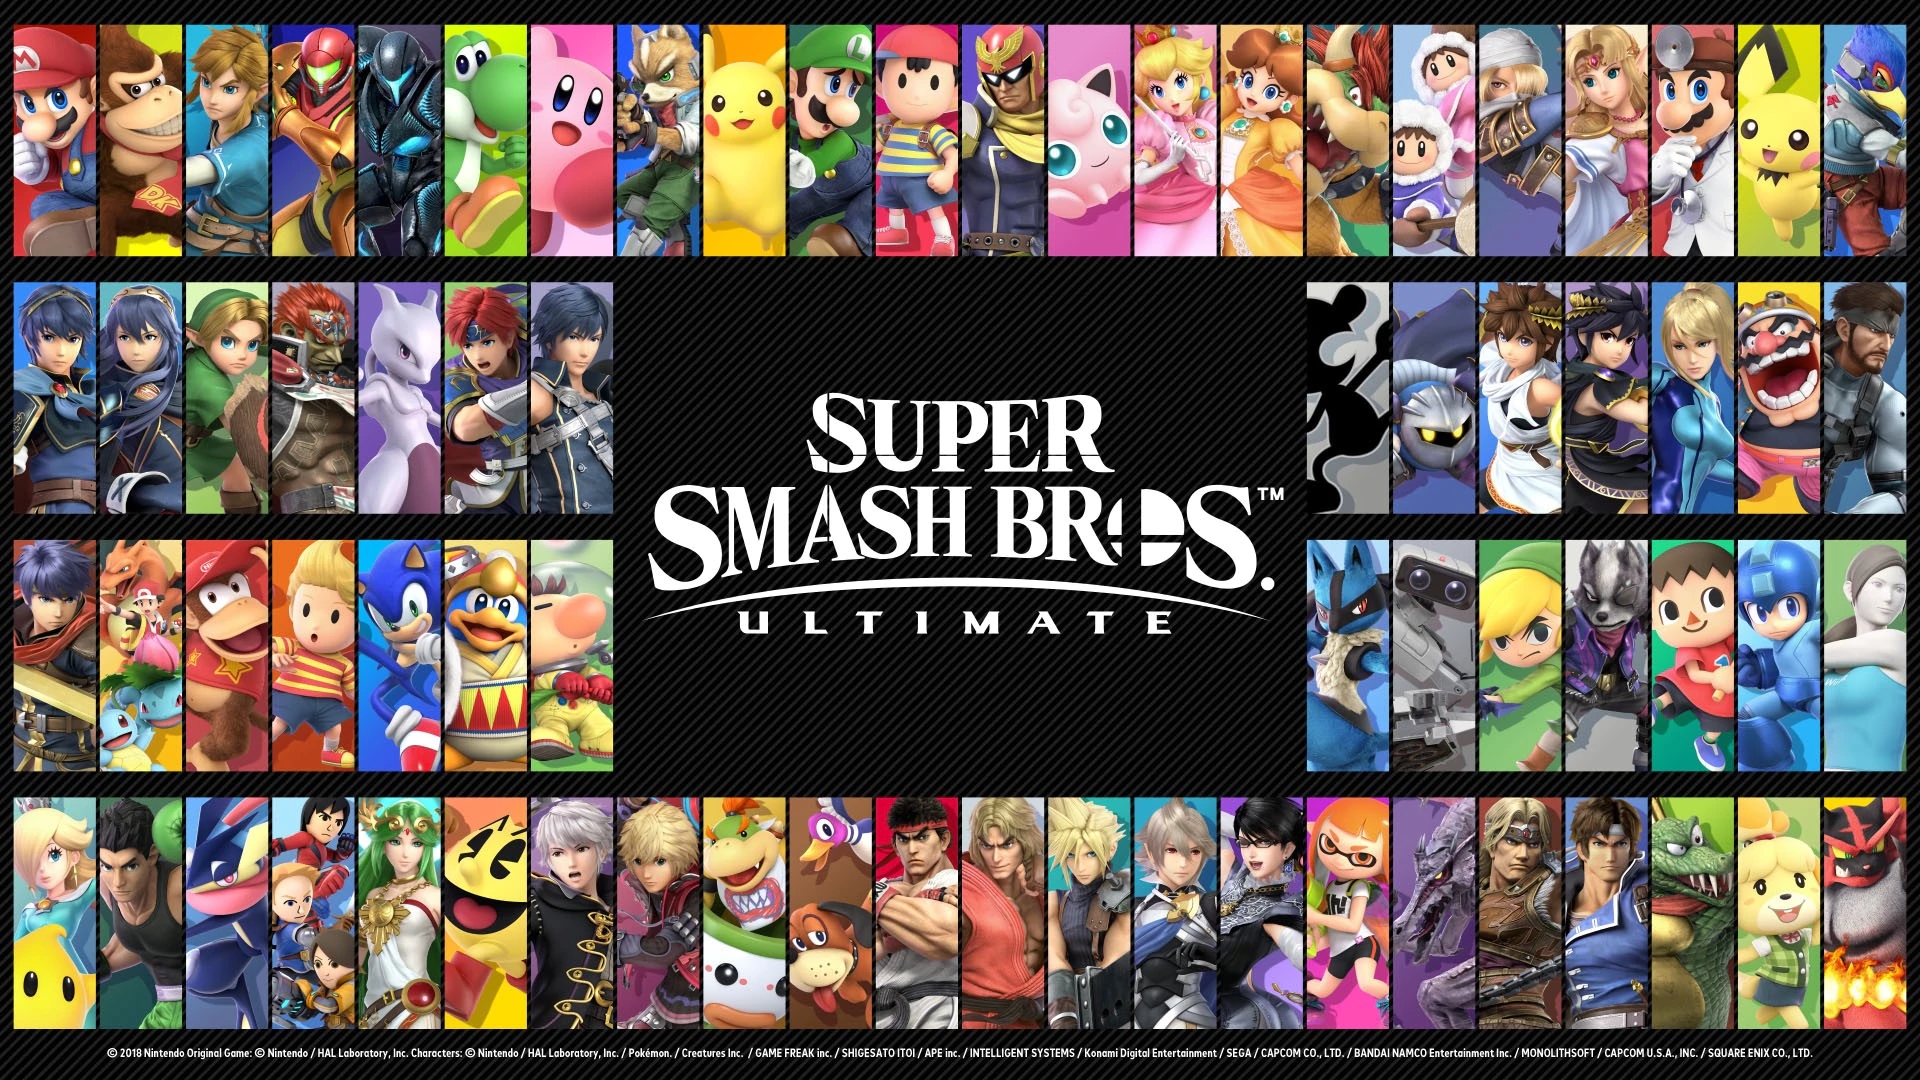 brian vervynck share pictures of super smash brothers photos